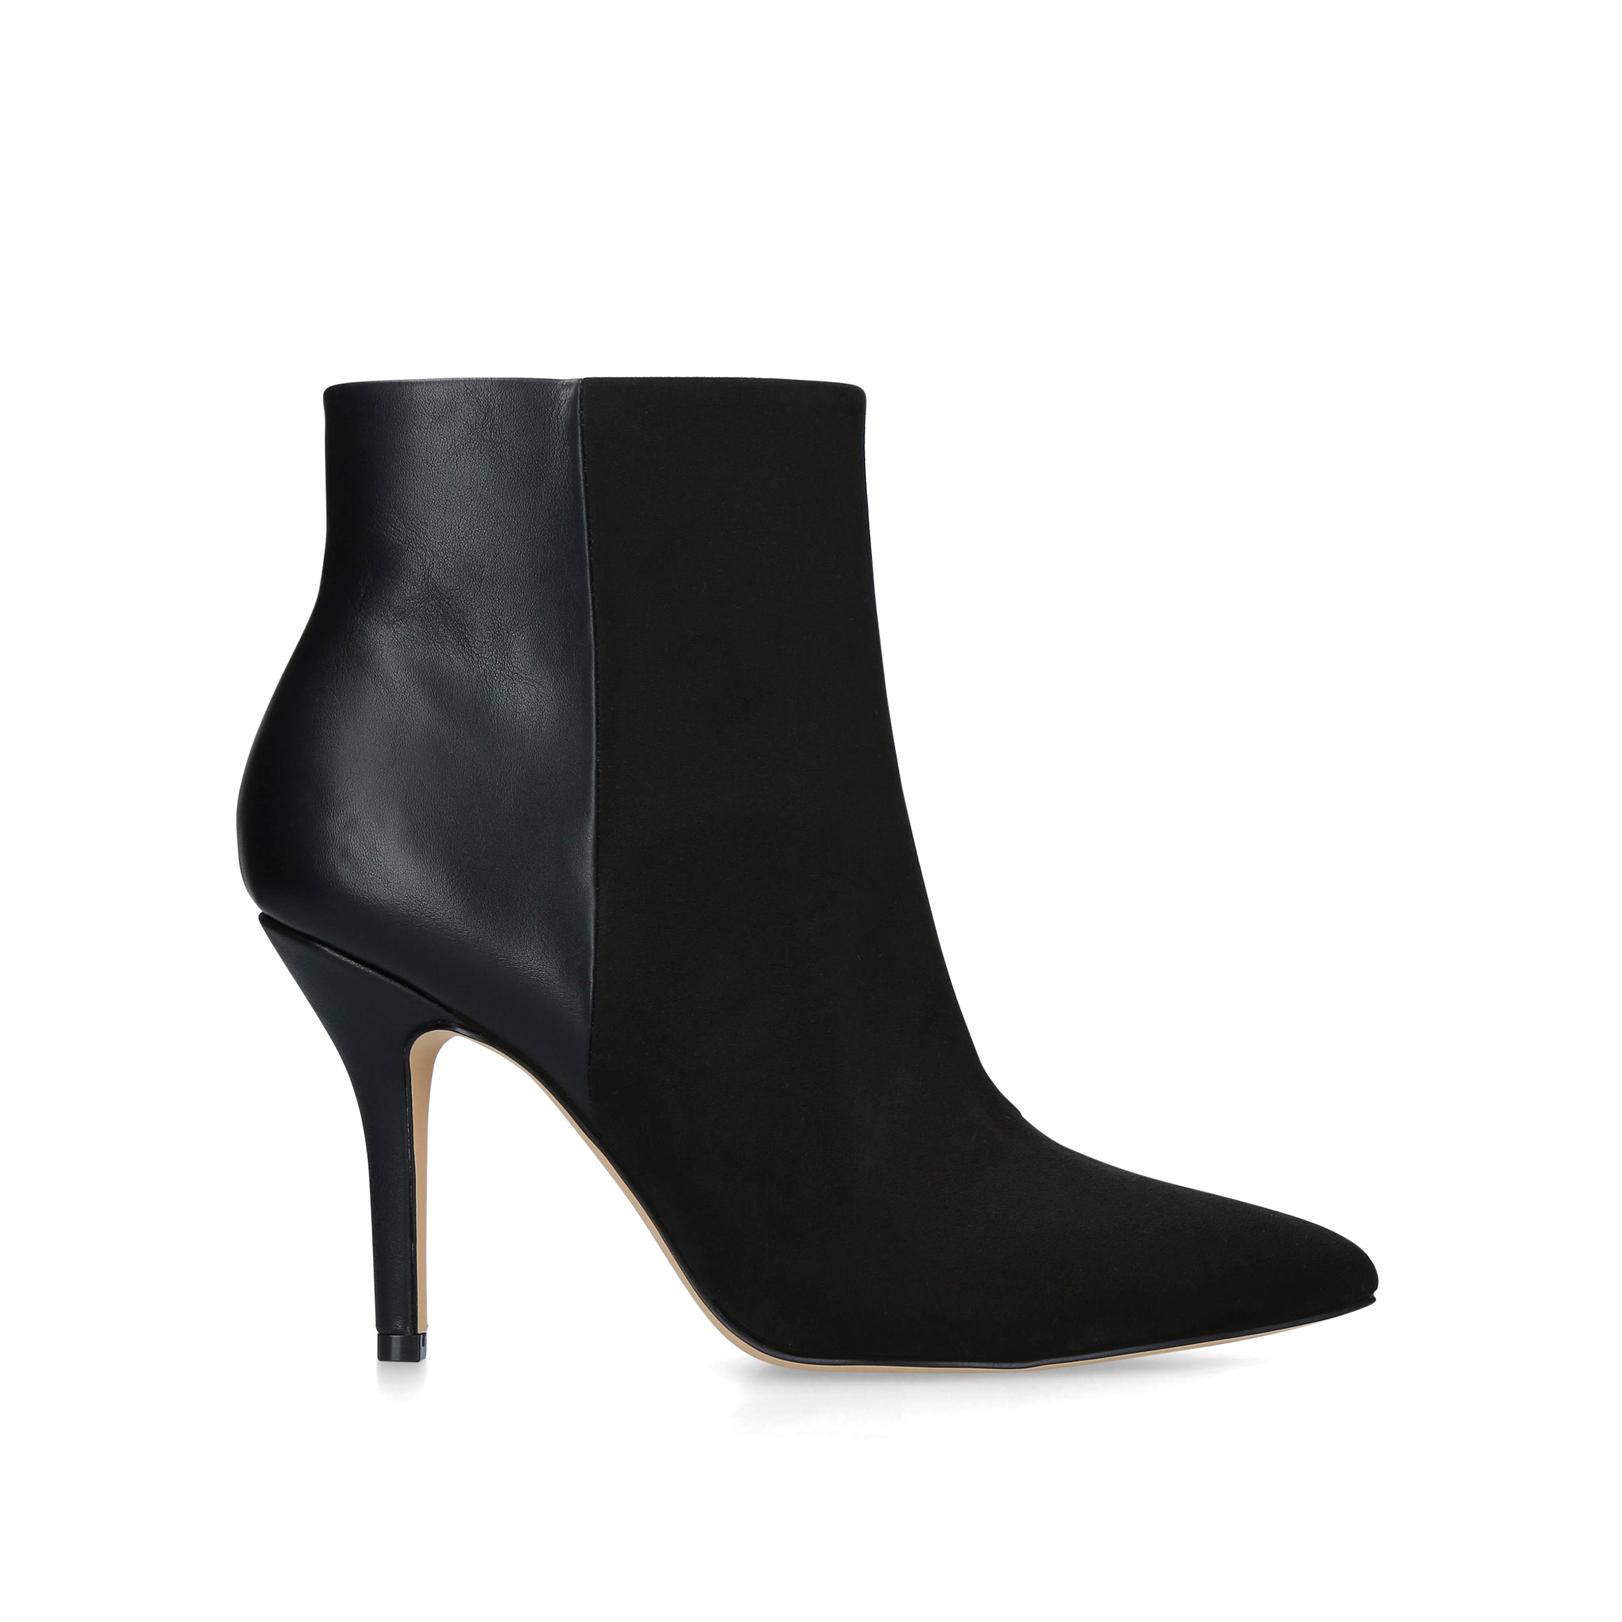 FLAGSHIP ANKLE BOOT - NINE WEST Ankle Boots